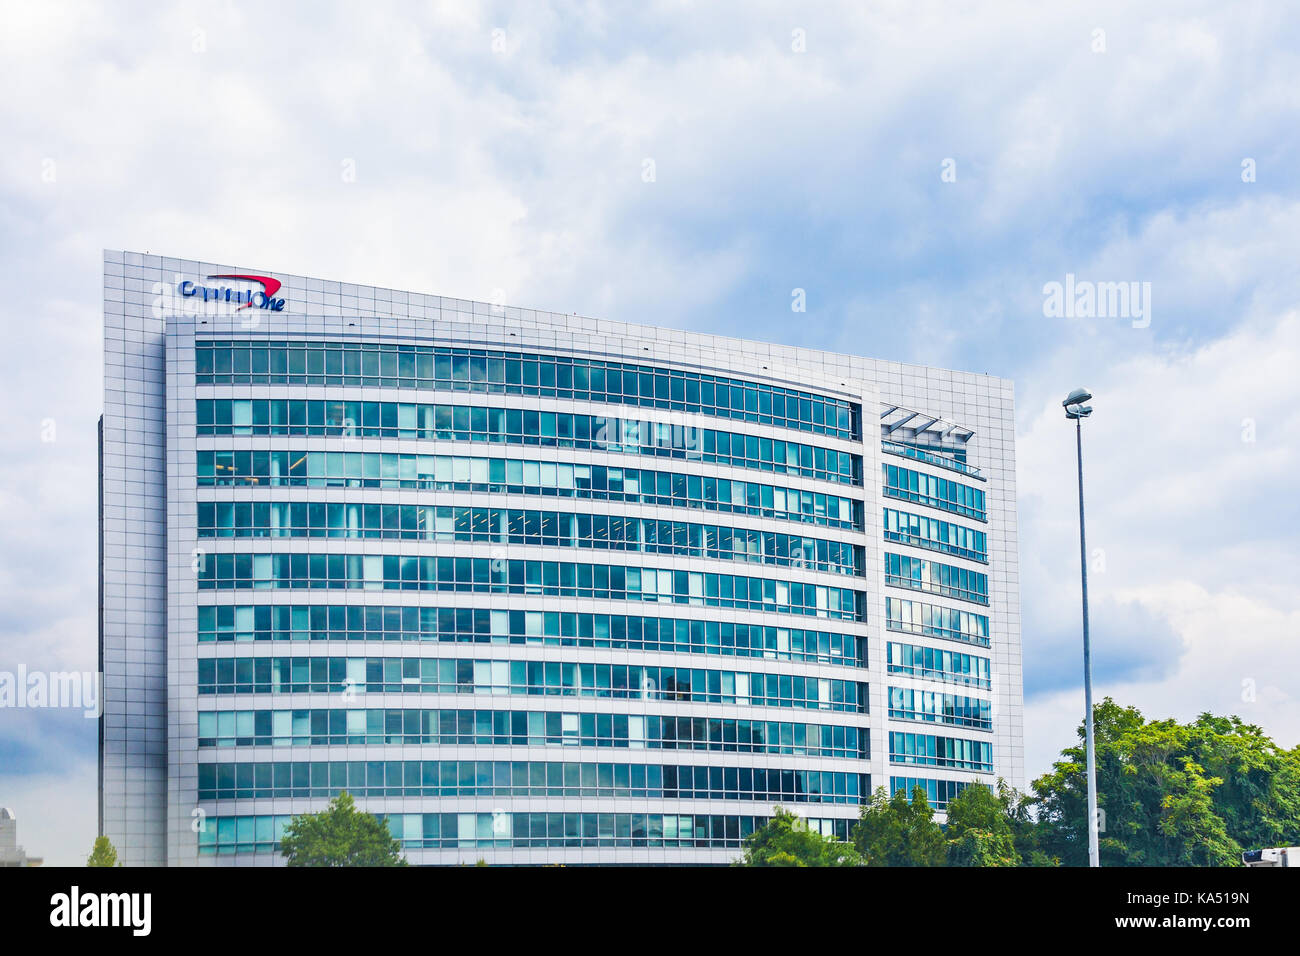 McLean, USA - September 16, 2017: Large Capital One Bank office building in Tyson's Corner in Virginia city with sign Stock Photo